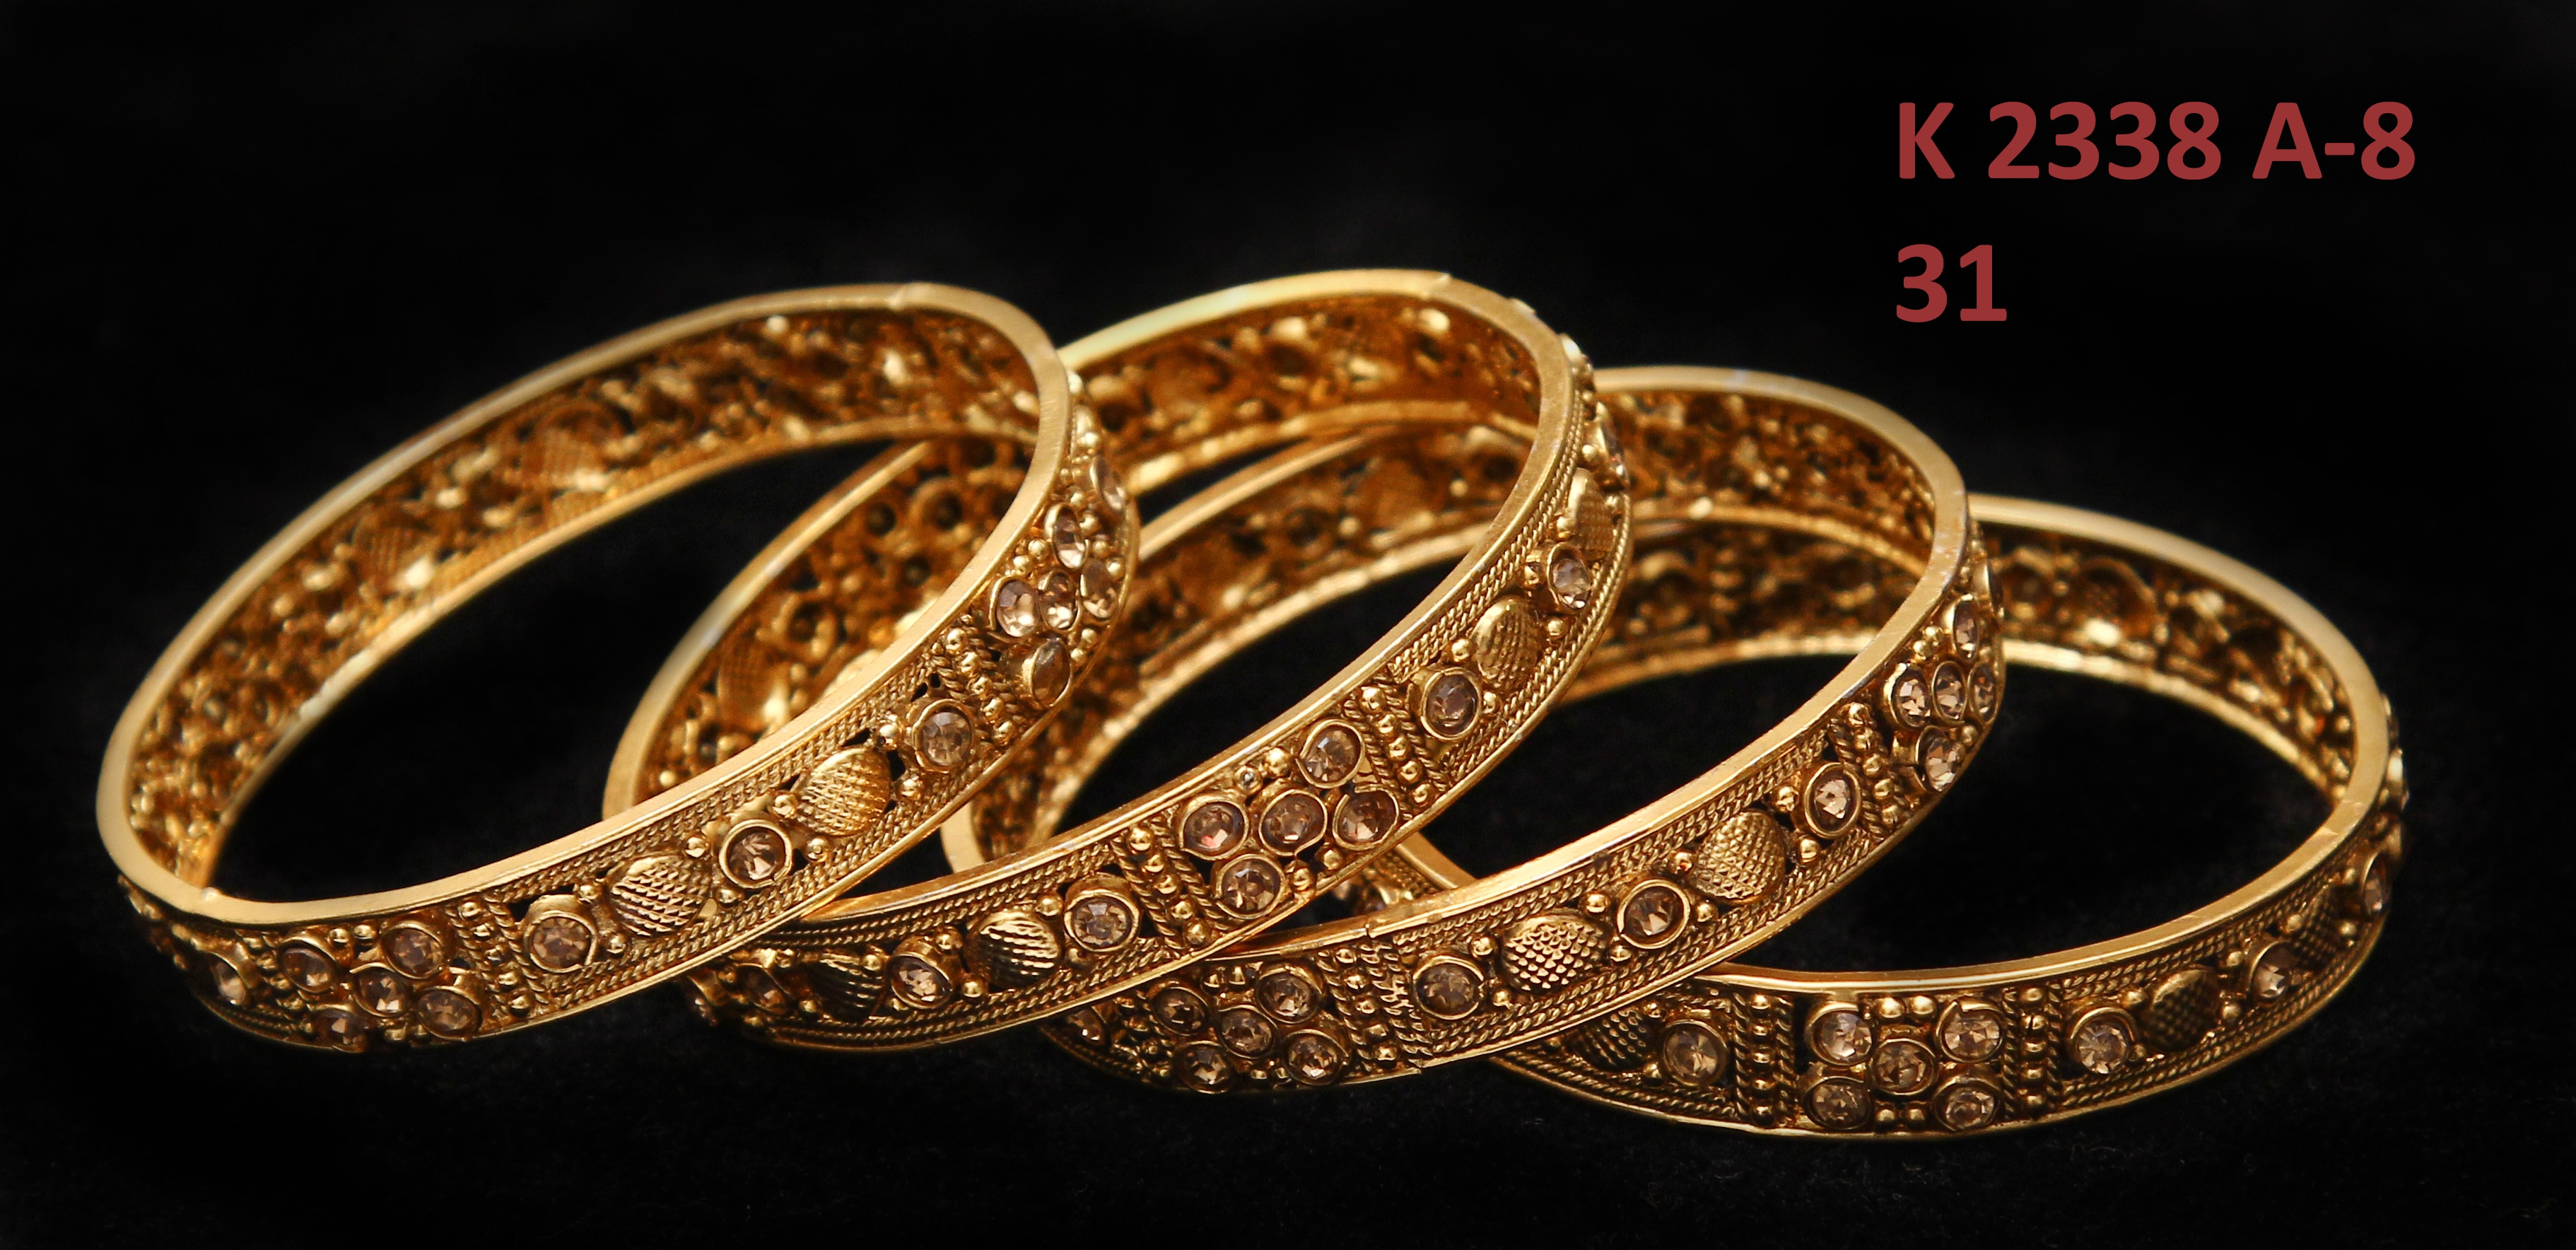 55Carat | 55Carat Unique Fashion Jewellery Stone Inticrated Gold-Plated Bangle Set Of 4 For Womens And Girls